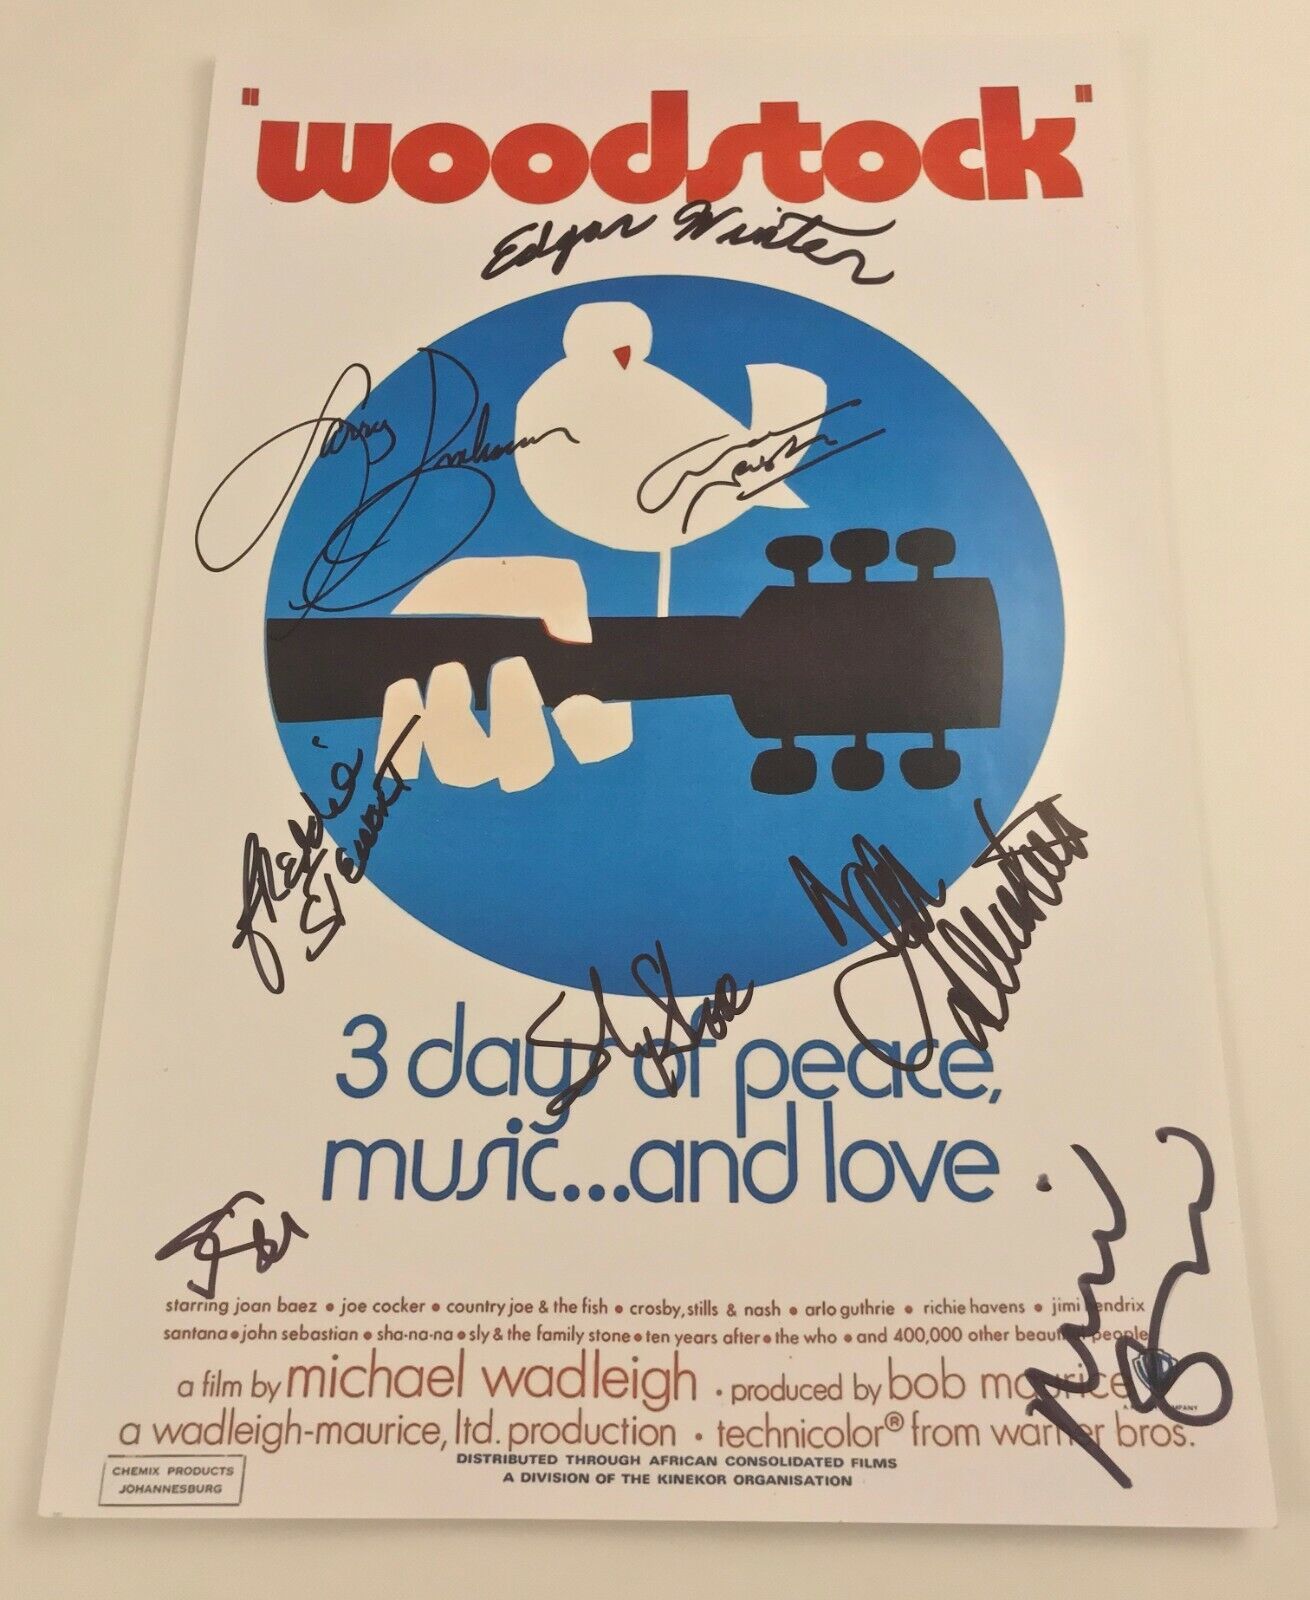 GFA Sly Stone x8 Autographs * '69 WOODSTOCK * Signed 12x18 Photo Poster painting Poster W4 COA